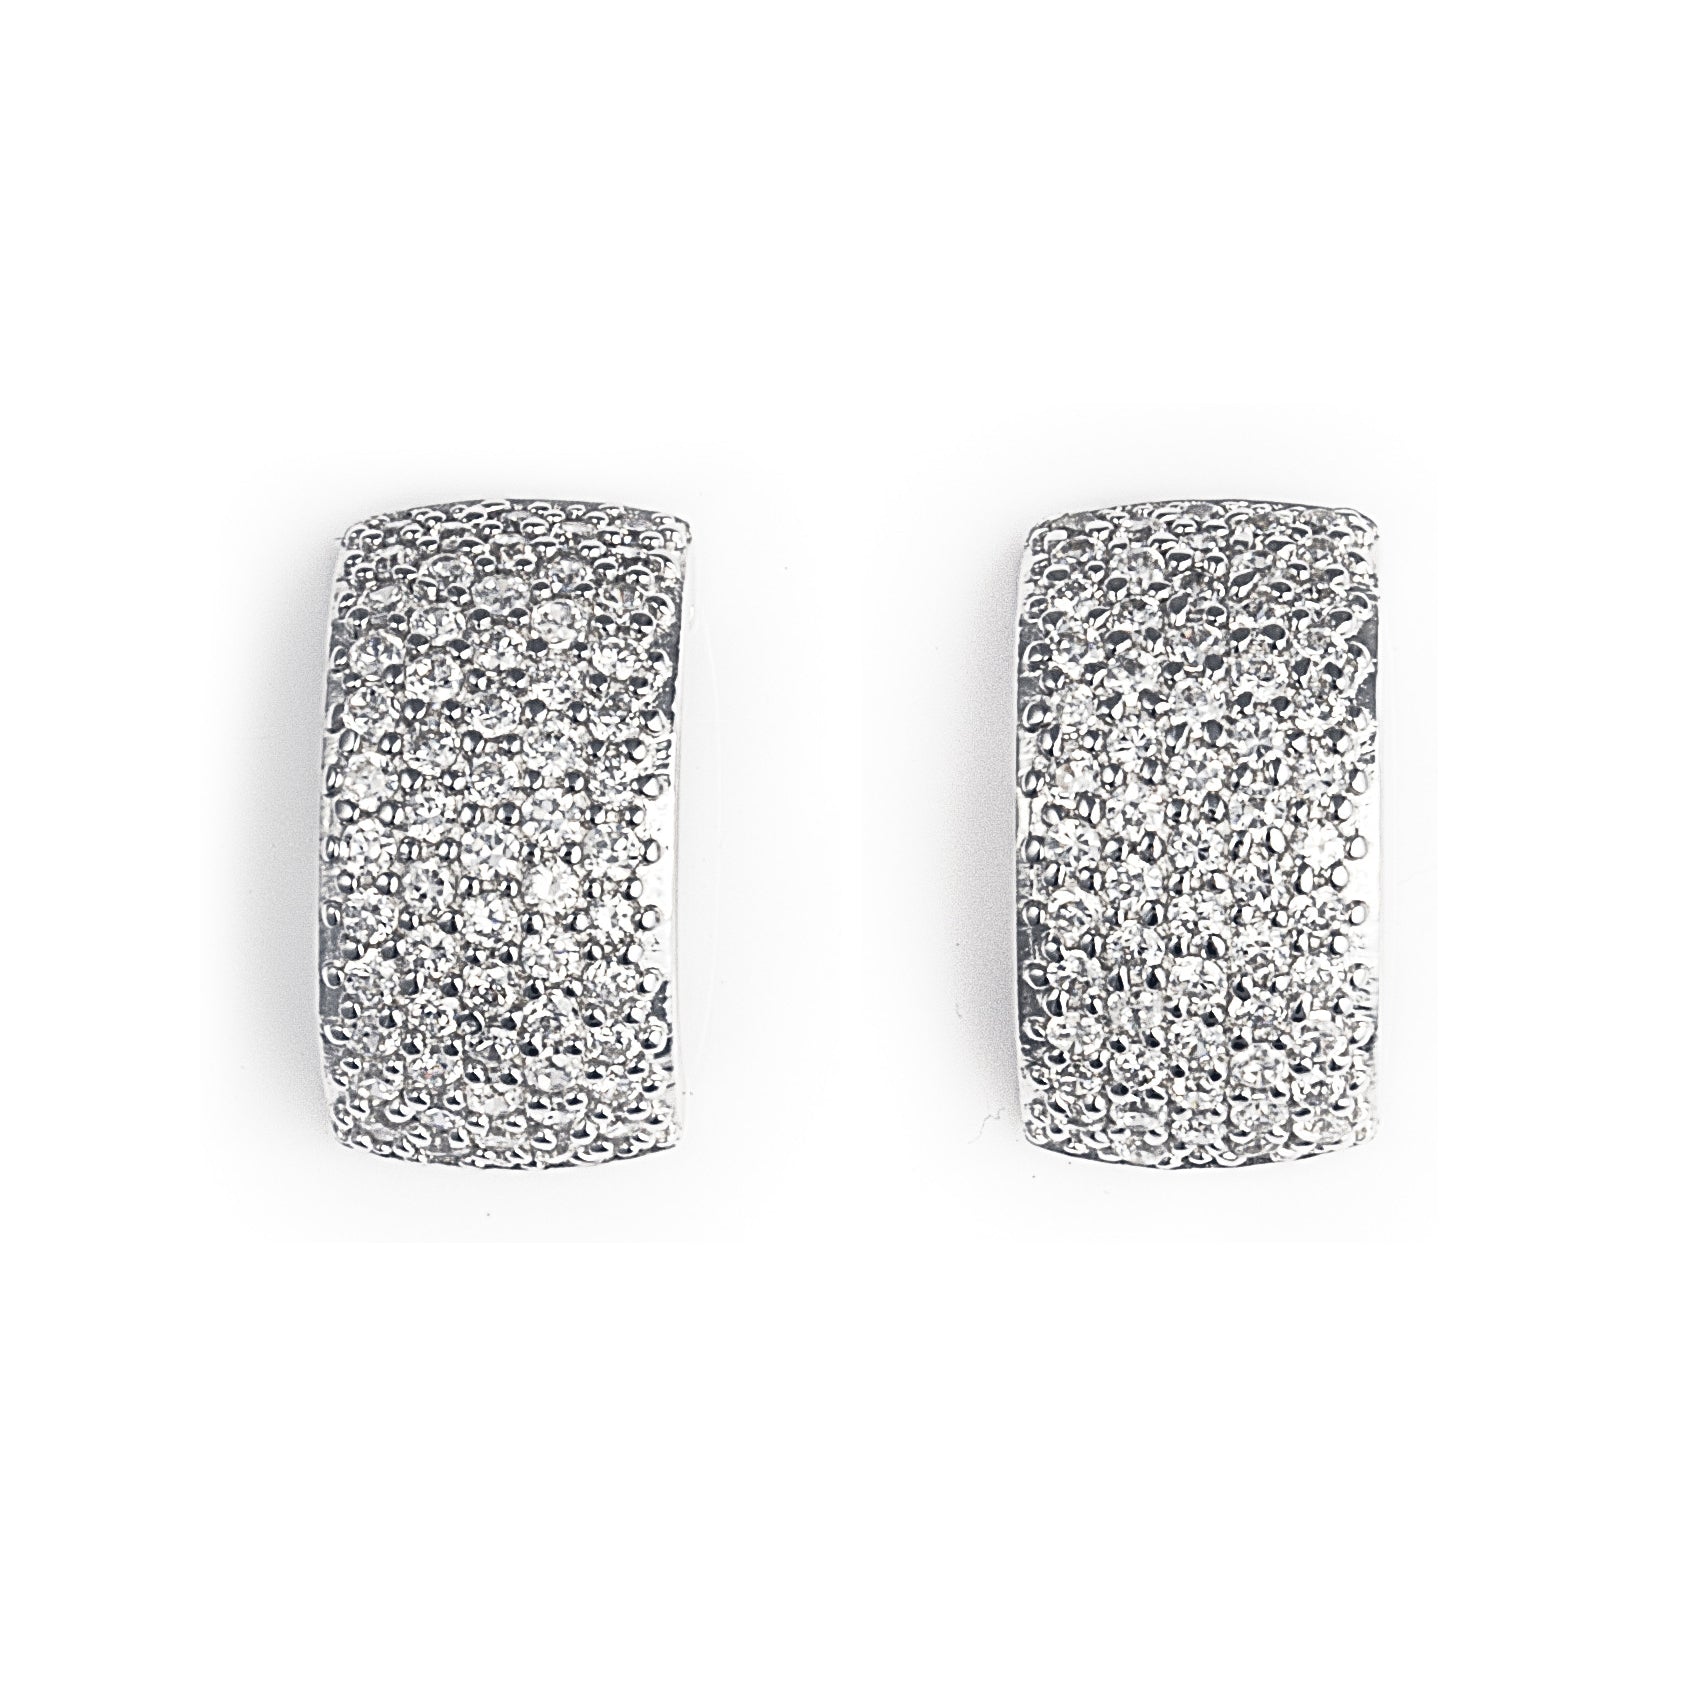 Ricca Donna Cuff earrings in 925 sterling silver encrusted with cubic zirconia stones. Worldwide shipping from Melbourne, Australia.